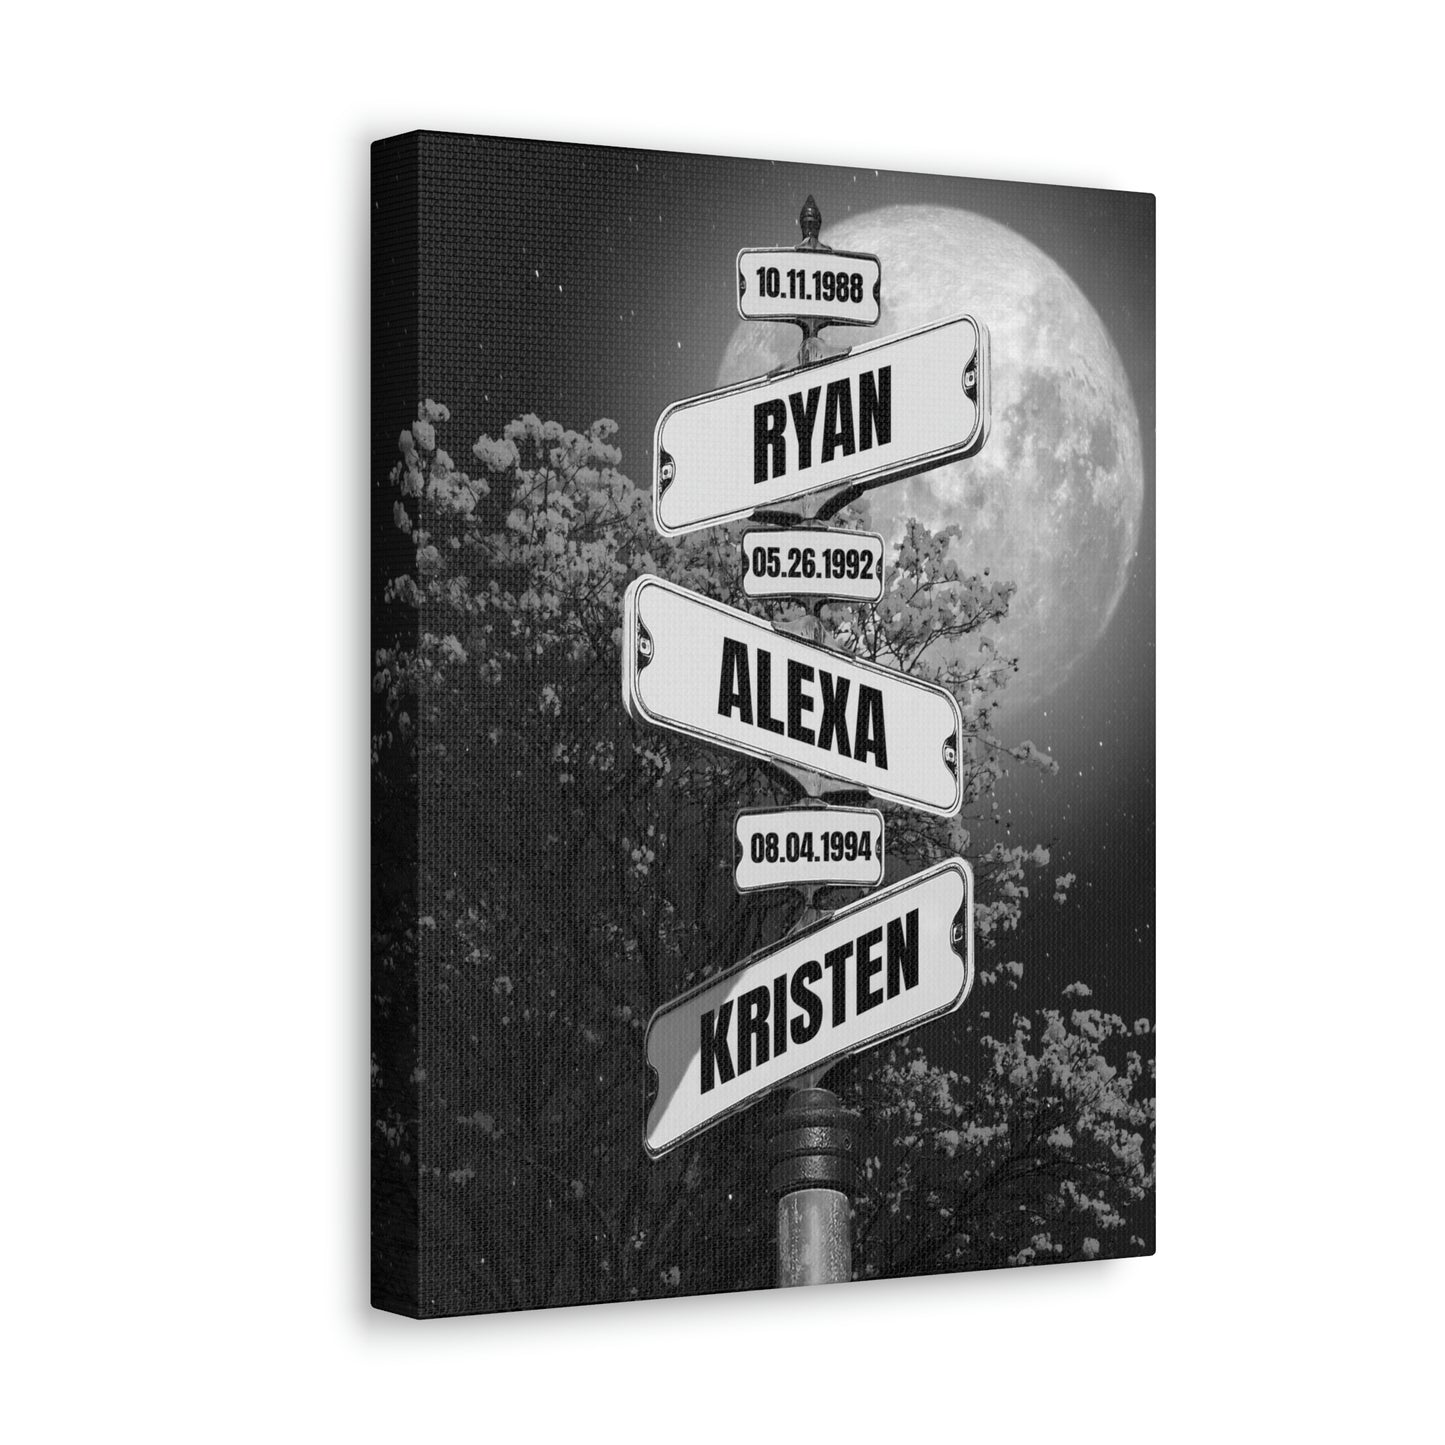 Full Moon at Night Date of Birth Vintage Street Sign Personalized Premium Canvas